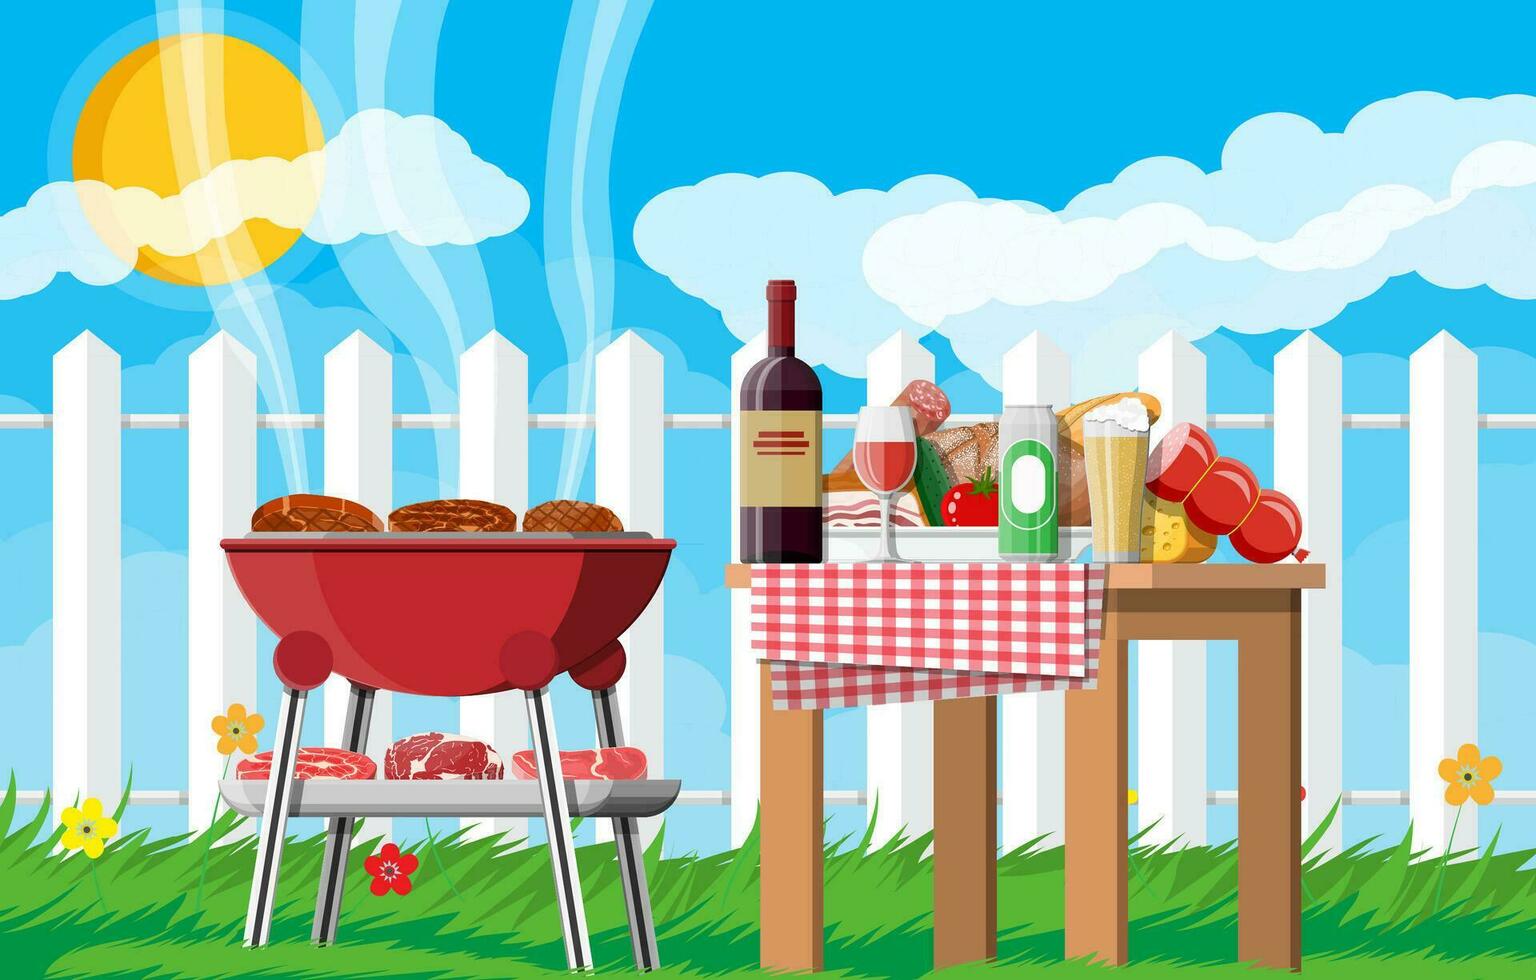 Bbq party or picnic. Table with bottle of wine, vegetables, cheese, can of beer. Electric grill with barbecue. Cooking steak, meat and sausages, grilling bbq. Vector illustration flat style